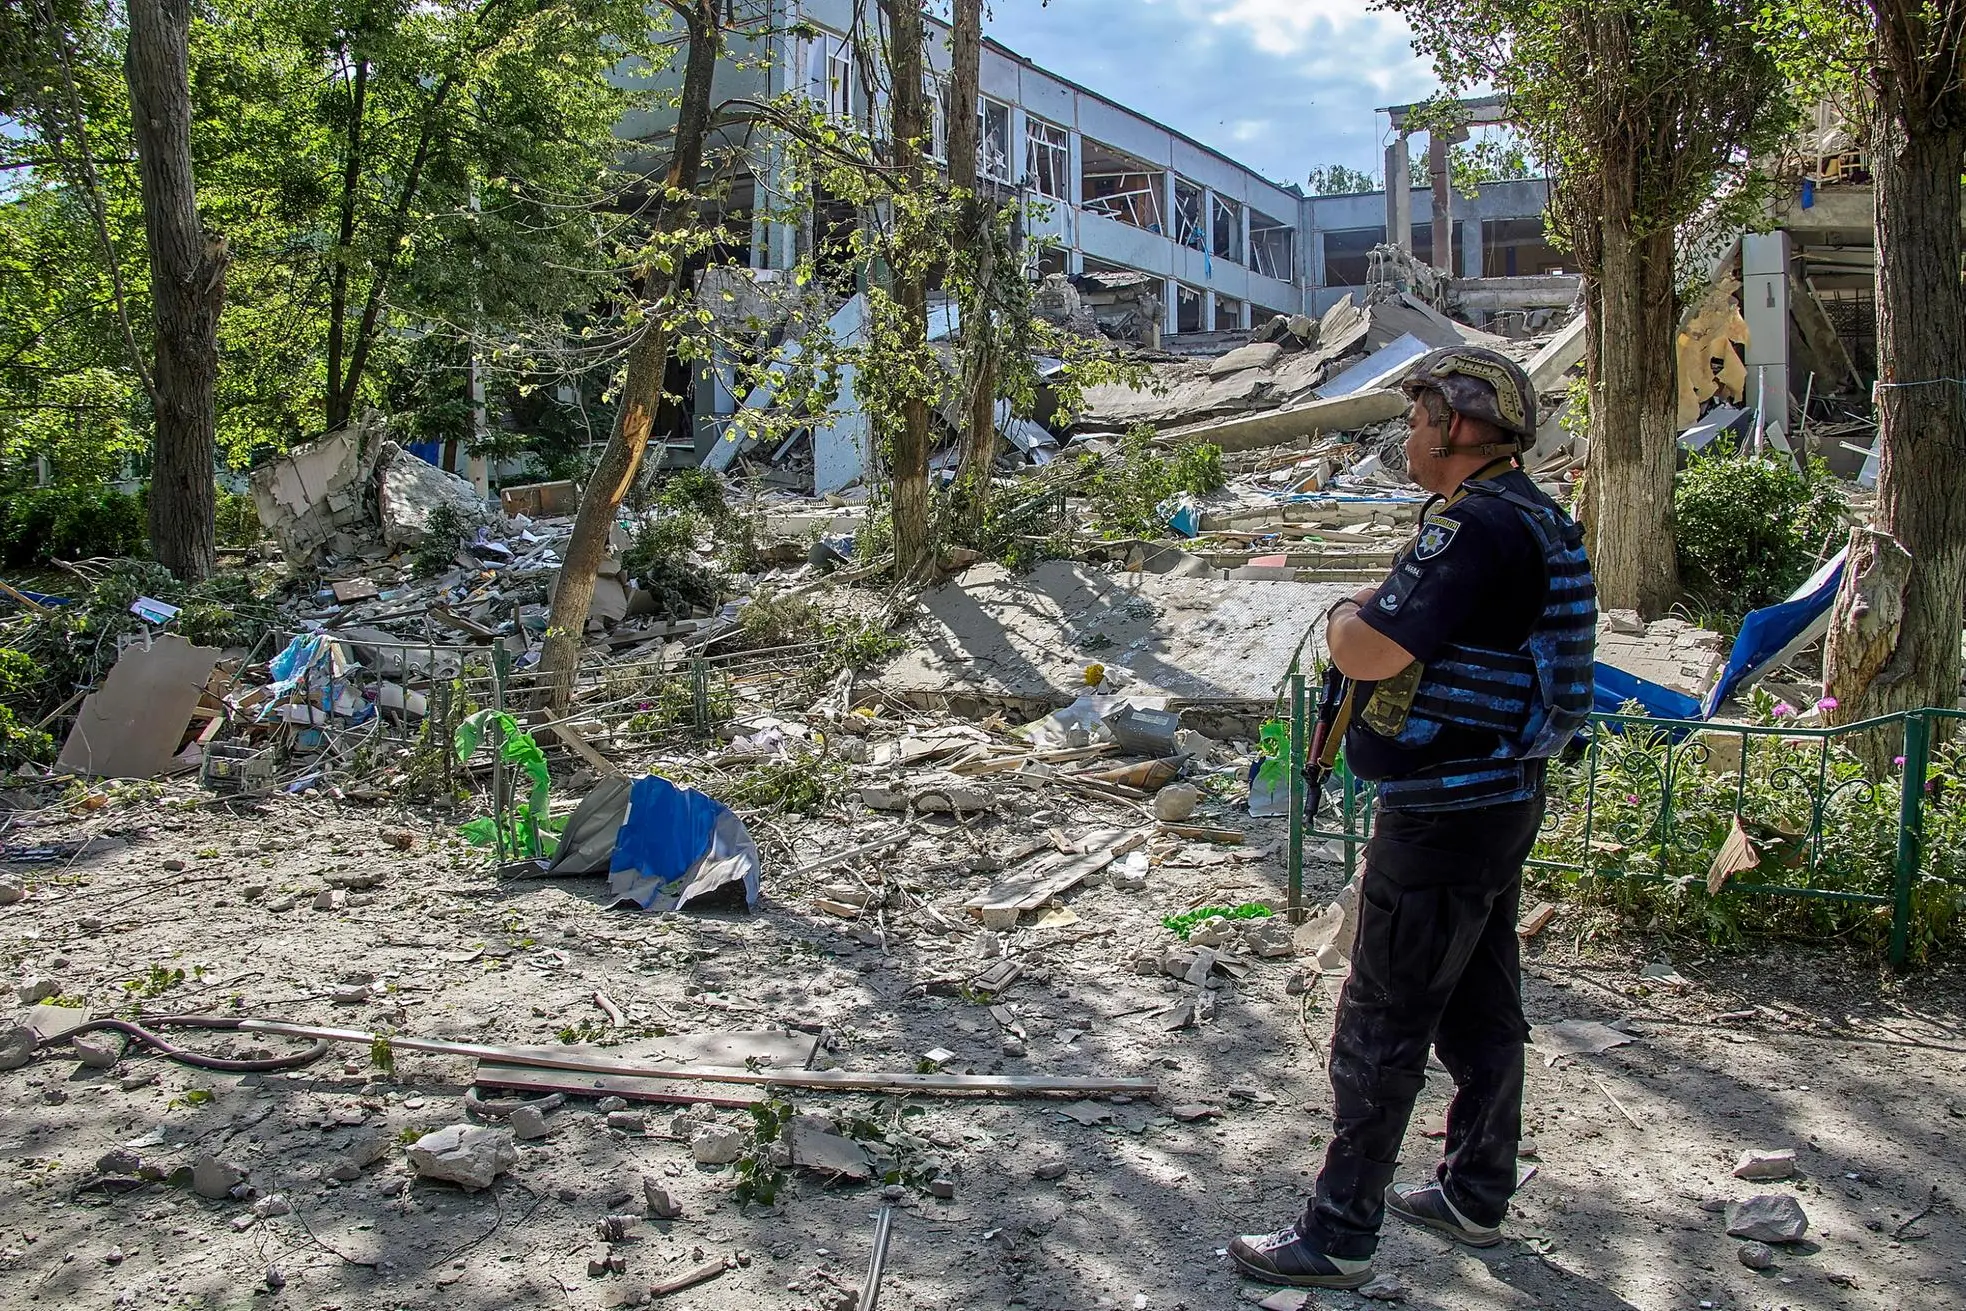 epa09991515 A policeman stands near a damaged school in the aftermath of an overnight rocket attack near Kharkiv, Ukraine, 02 June 2022. Russian troops on 24 February entered Ukrainian territory, starting a conflict that has provoked destruction and a humanitarian crisis. According to data released by the United Nations refugee agency UNHCR on 29 May, over 6.8 million people have fled Ukraine since Russian troops entered the country on 24 February 2022. EPA/SERGEY KOZLOV